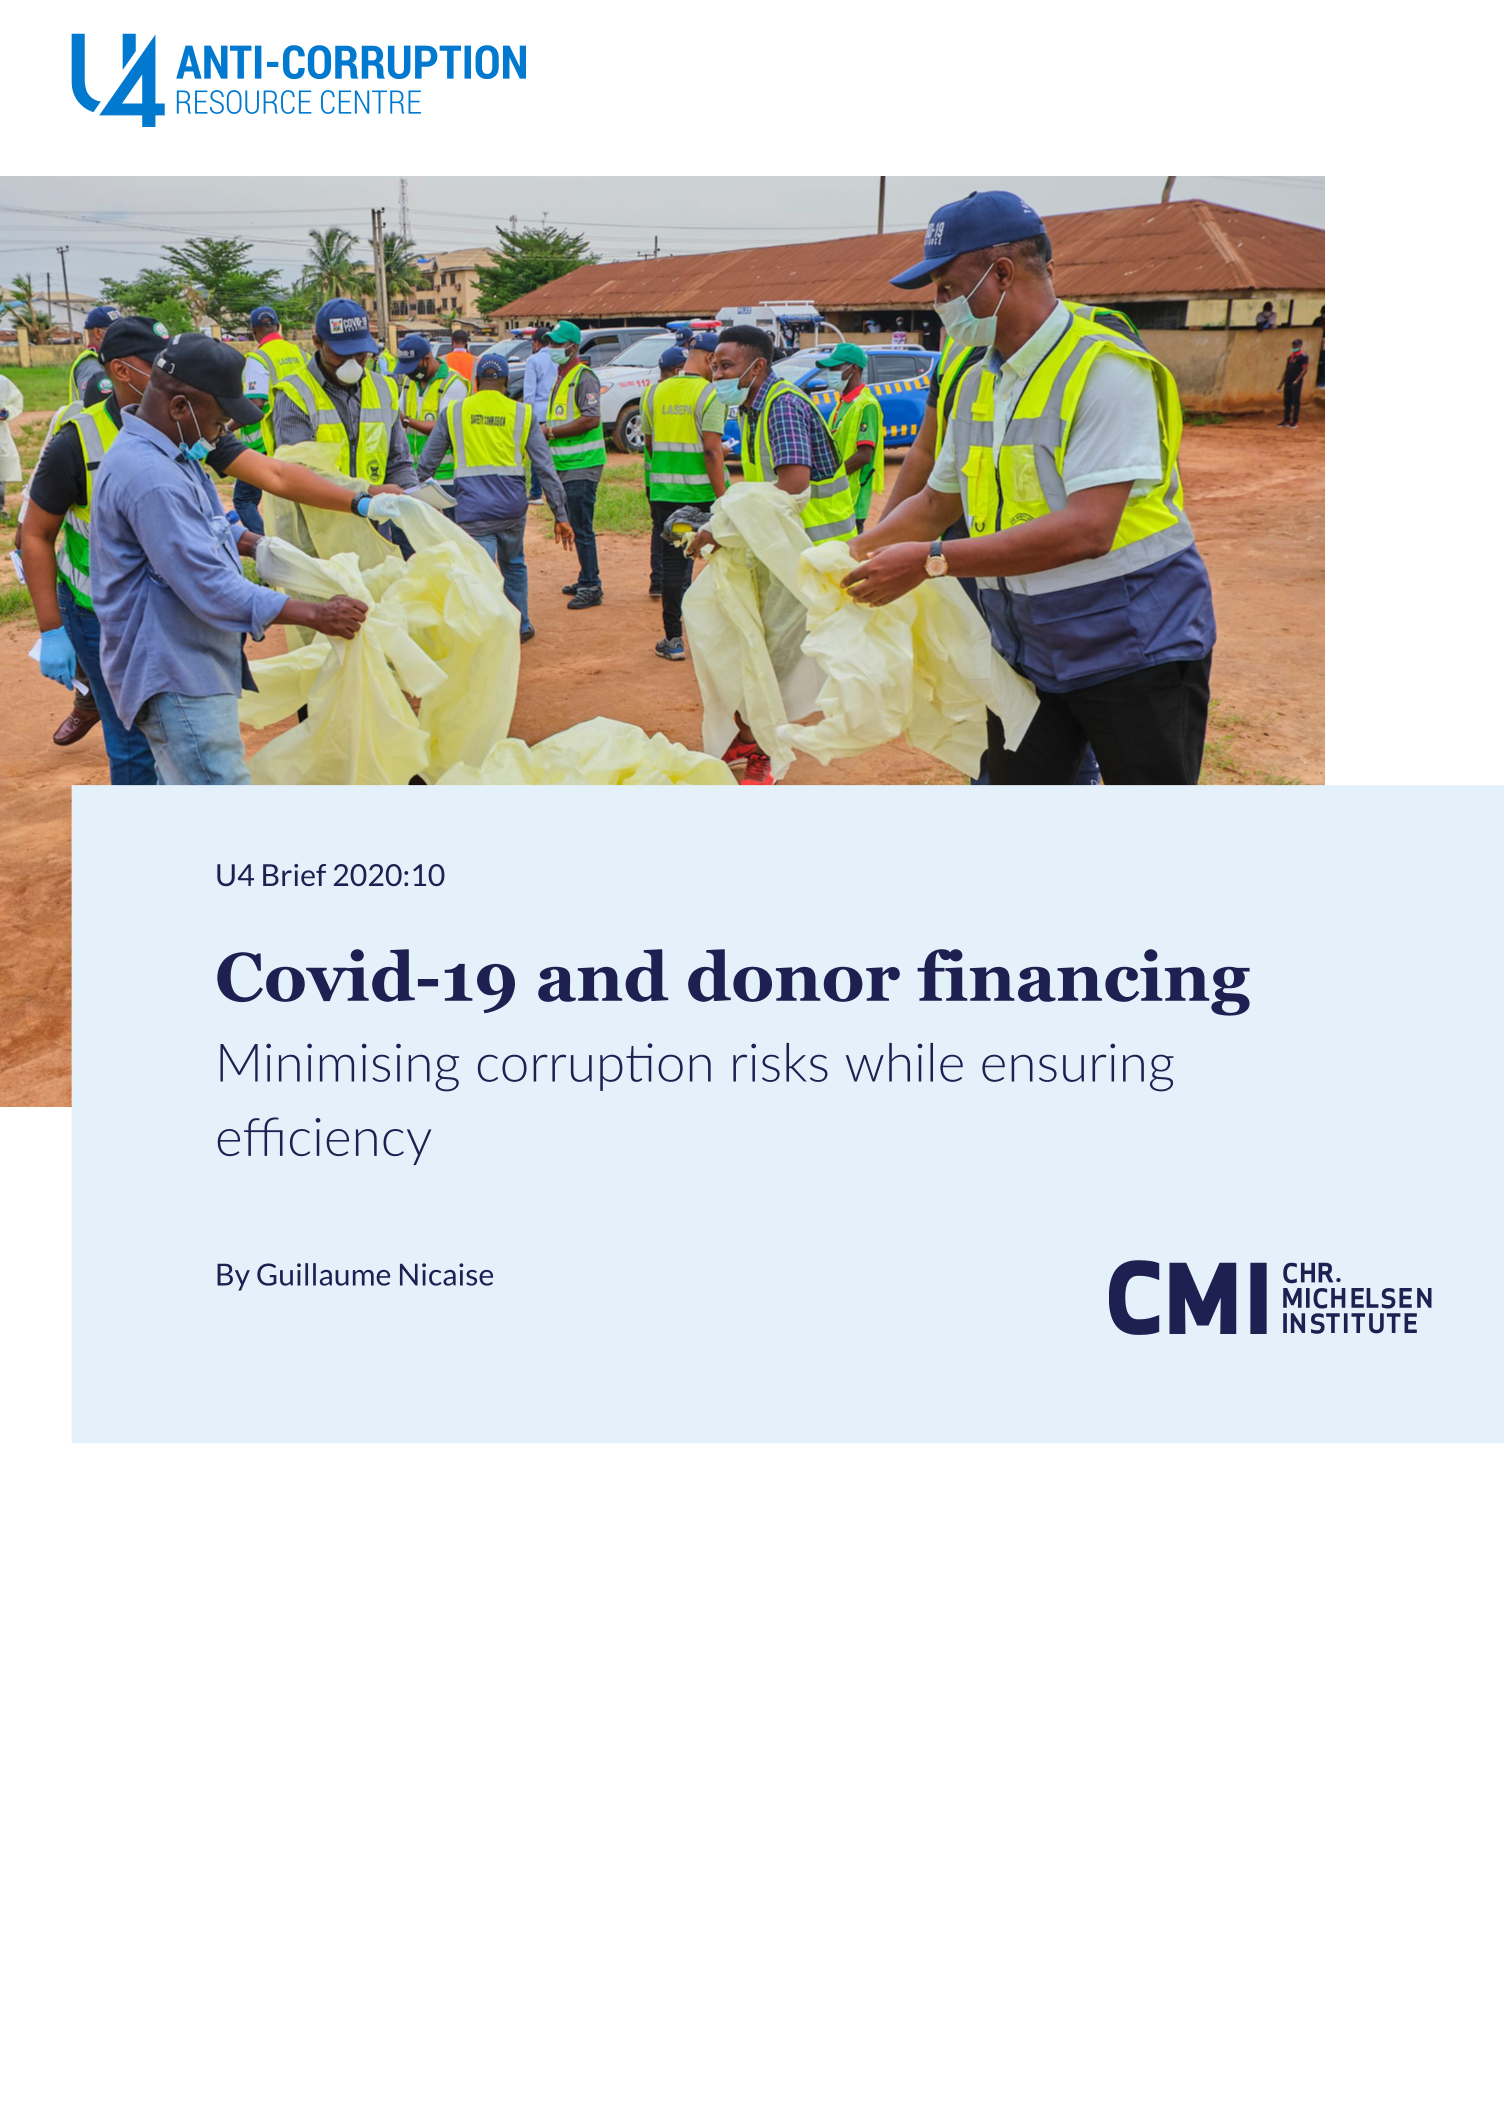 Covid-19 and donor financing